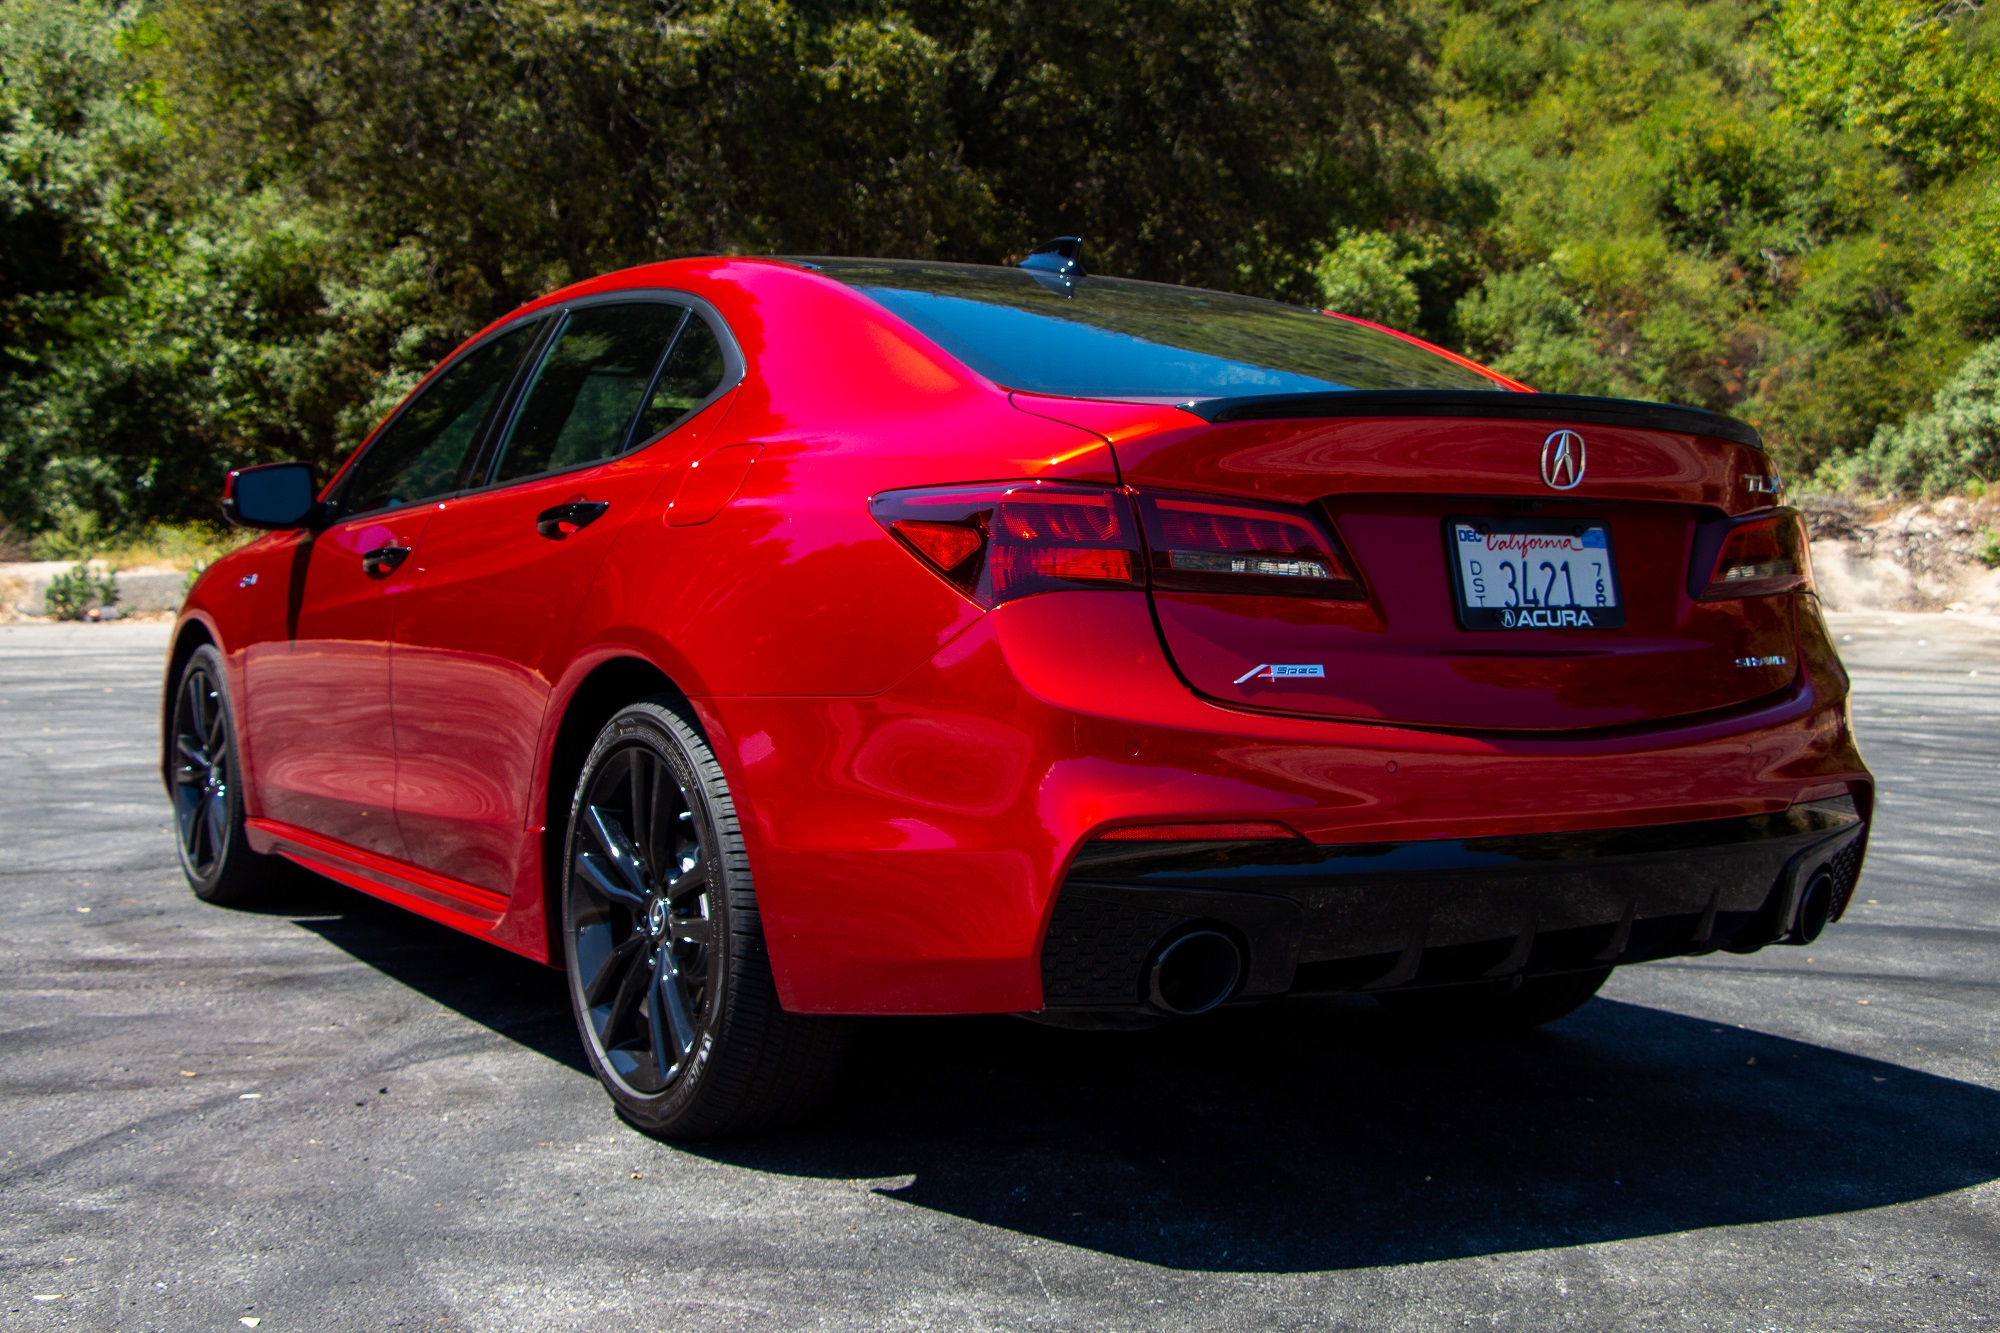 2020 Acura TLX PMC Edition Quick Drive Review: Look At That Paint